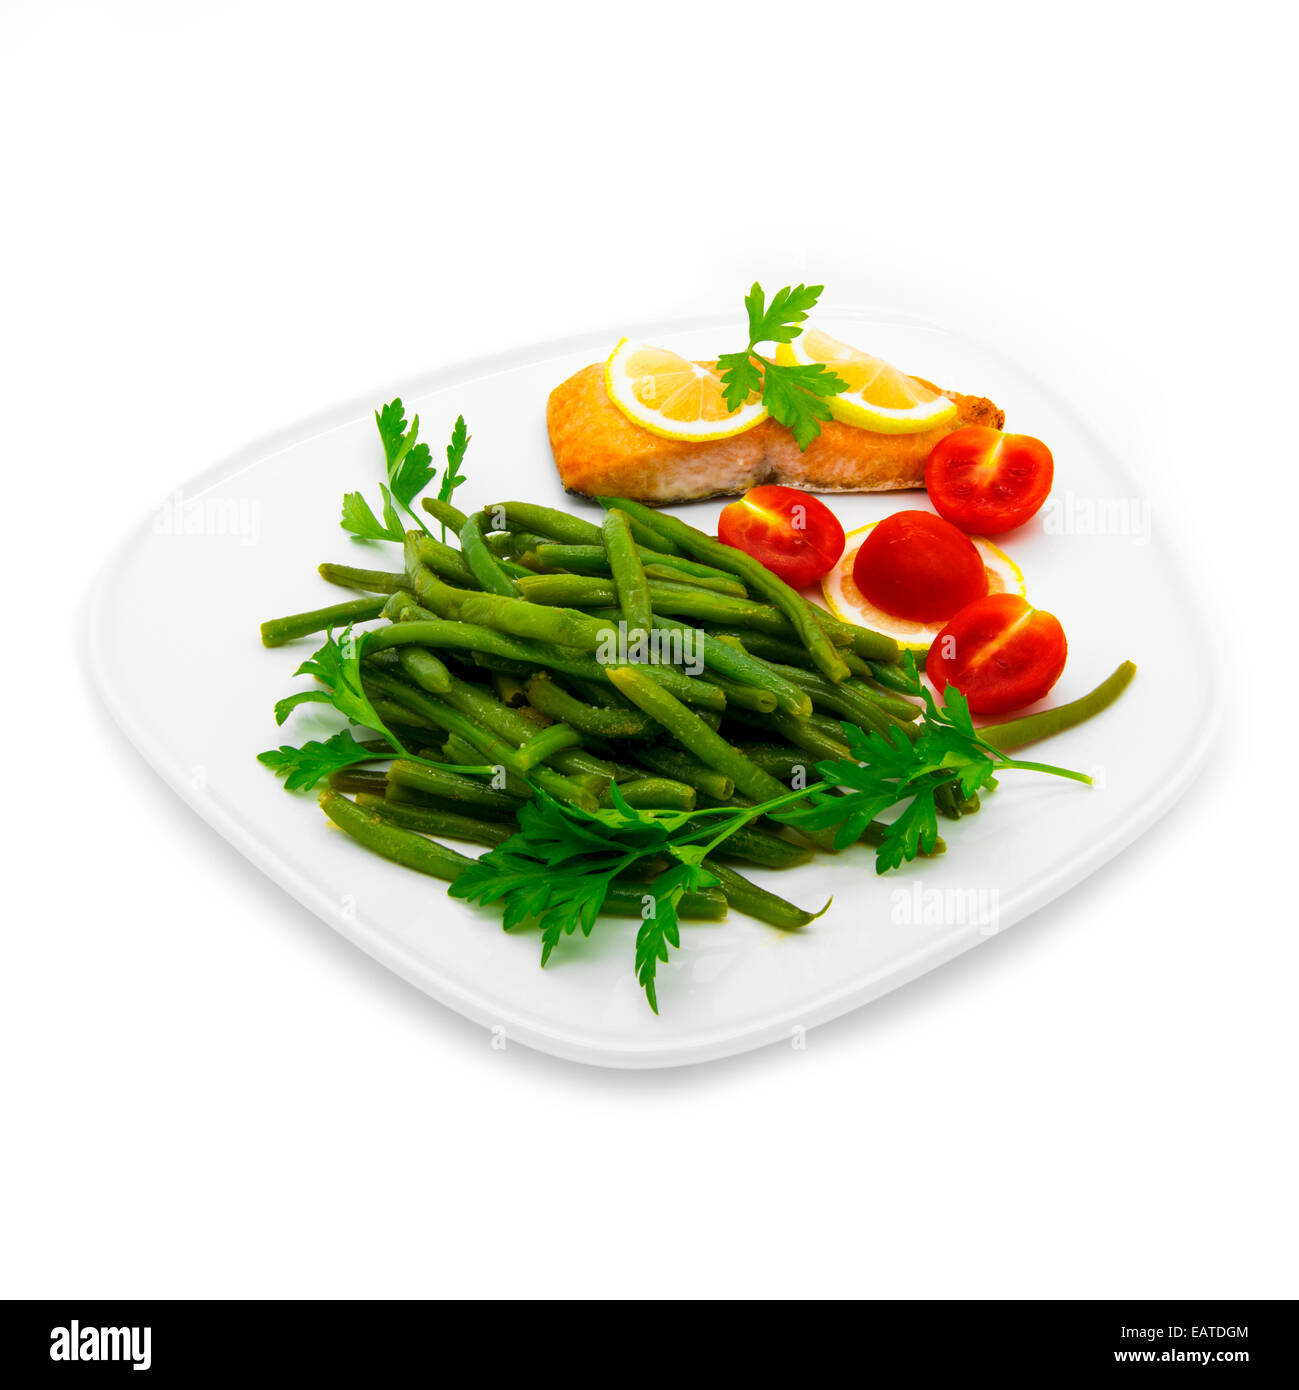 Green beans and salmon fish. White background. Stock Photo